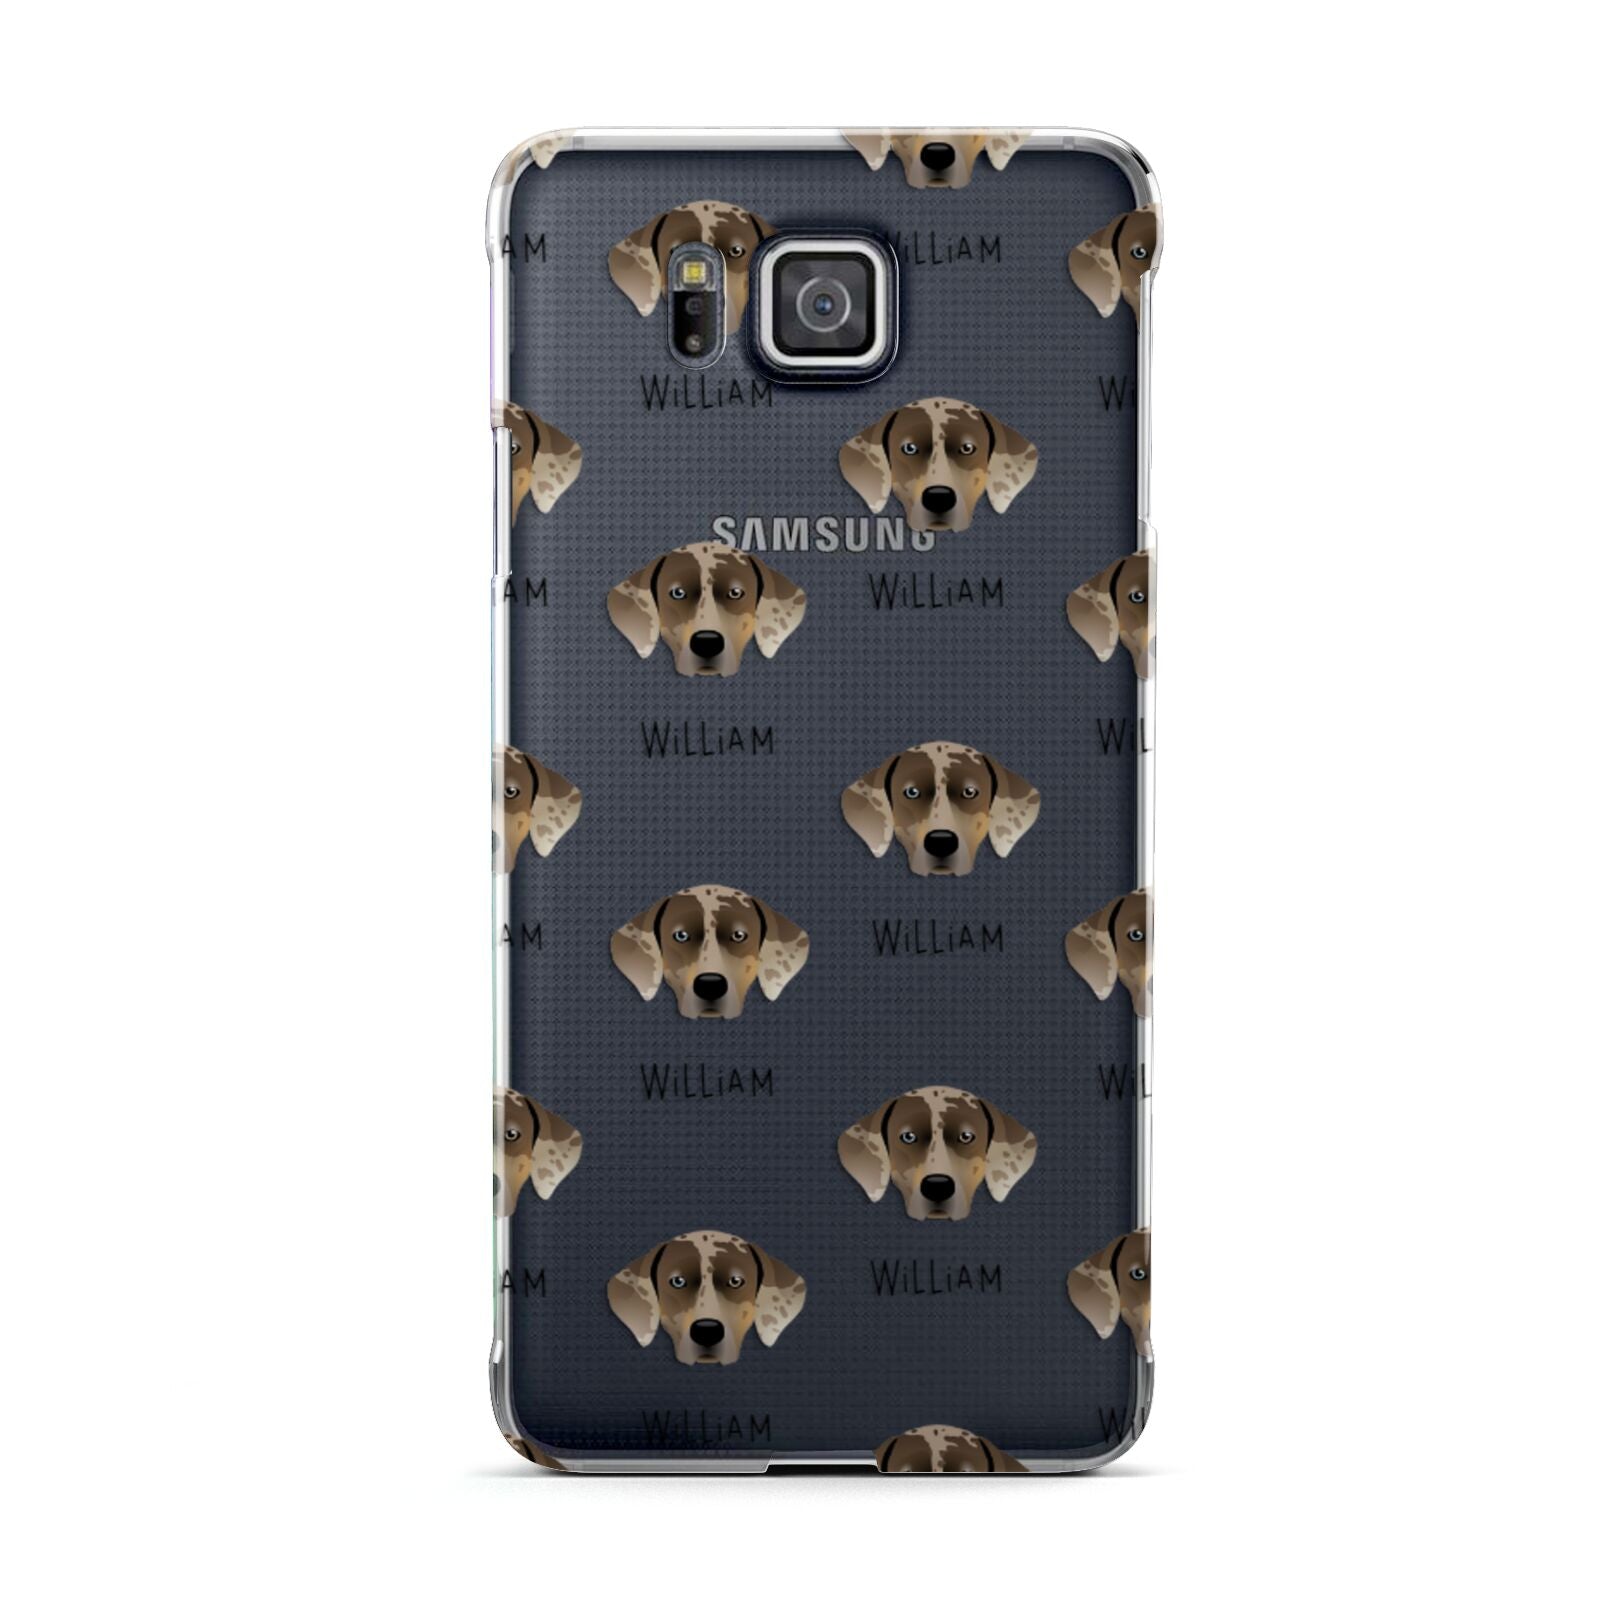 Catahoula Leopard Dog Icon with Name Samsung Galaxy Alpha Case